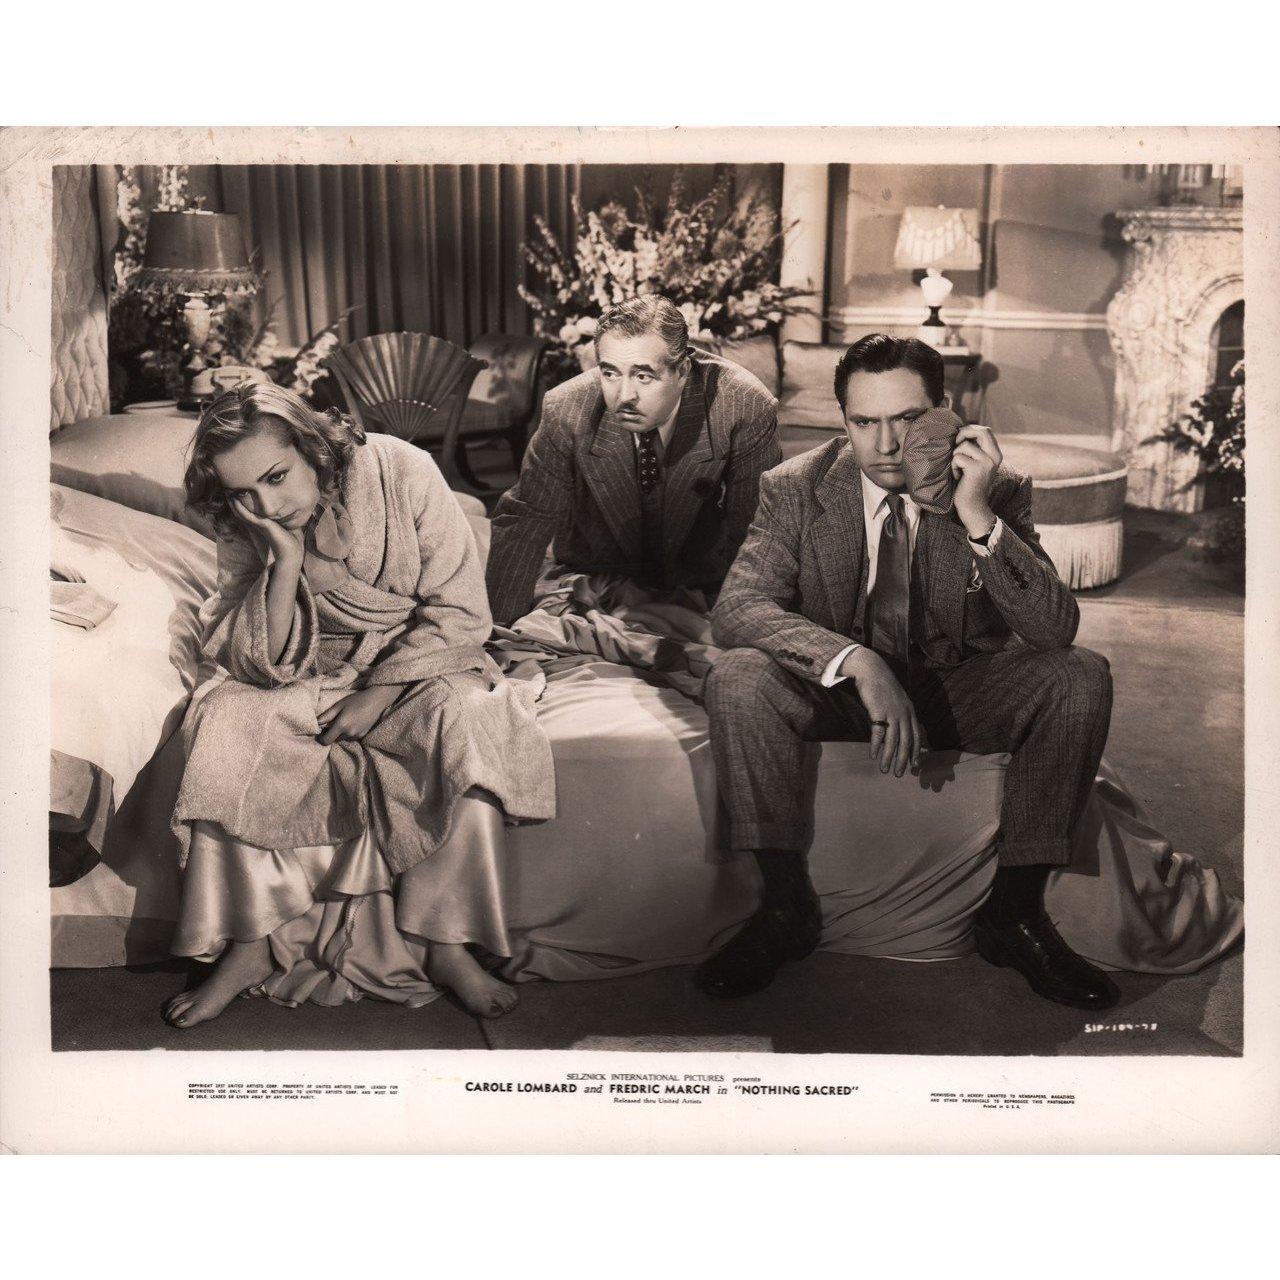 Original 1937 U.S. silver gelatin single-weight photo for the film Nothing Sacred directed by William A. Wellman with Carole Lombard / Fredric March / Charles Winninger / Walter Connolly. Very good-fine condition. Please note: the size is stated in